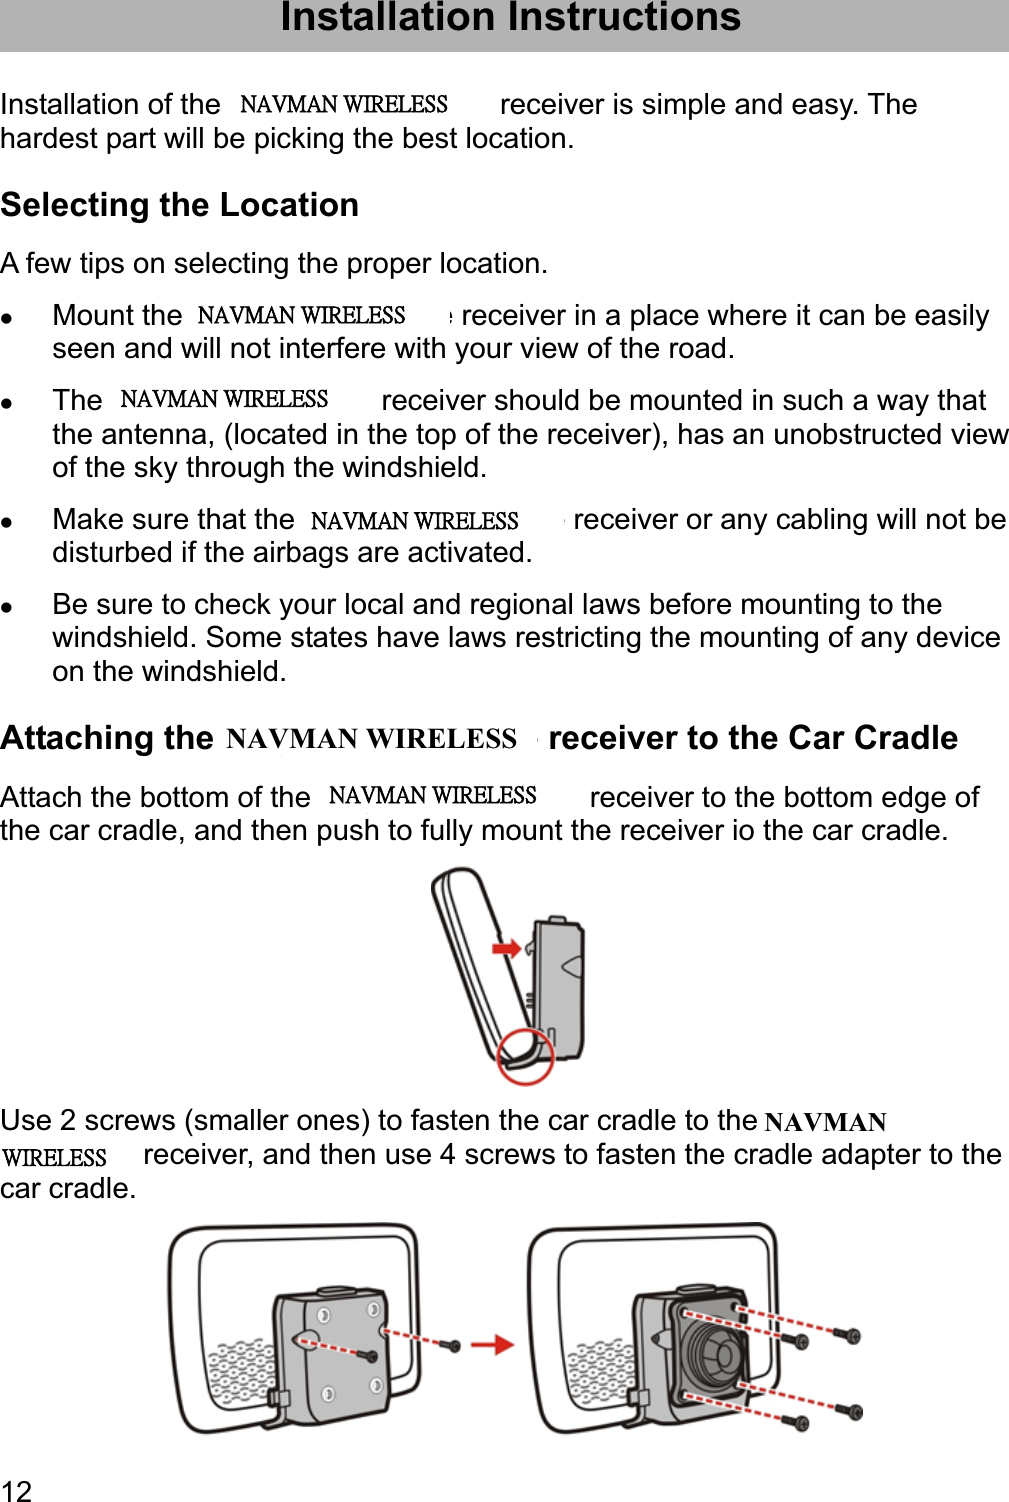 12Installation Instructions Installation of the Magellan RoadMate receiver is simple and easy. The hardest part will be picking the best location. Selecting the Location A few tips on selecting the proper location. zMount the Magellan RoadMate receiver in a place where it can be easily seen and will not interfere with your view of the road. zThe Magellan RoadMate receiver should be mounted in such a way that the antenna, (located in the top of the receiver), has an unobstructed view of the sky through the windshield. zMake sure that the Magellan RoadMate receiver or any cabling will not be disturbed if the airbags are activated. zBe sure to check your local and regional laws before mounting to the windshield. Some states have laws restricting the mounting of any device on the windshield. Attaching the Magellan RoadMate receiver to the Car Cradle Attach the bottom of the Magellan RoadMate receiver to the bottom edge of the car cradle, and then push to fully mount the receiver io the car cradle. Use 2 screws (smaller ones) to fasten the car cradle to the Magellan RoadMate receiver, and then use 4 screws to fasten the cradle adapter to the car cradle. ʳʳˡ˔˩ˠ˔ˡʳ˪˜˥˘˟˘˦˦ʳʳˡ˔˩ˠ˔ˡʳ˪˜˥˘˟˘˦˦ʳʳˡ˔˩ˠ˔ˡʳ˪˜˥˘˟˘˦˦ʳʳˡ˔˩ˠ˔ˡʳ˪˜˥˘˟˘˦˦ʳʳˡ˔˩ˠ˔ˡʳ˪˜˥˘˟˘˦˦ NAVMAN WIRELESSNAVMANʳ˪˜˥˘˟˘˦˦